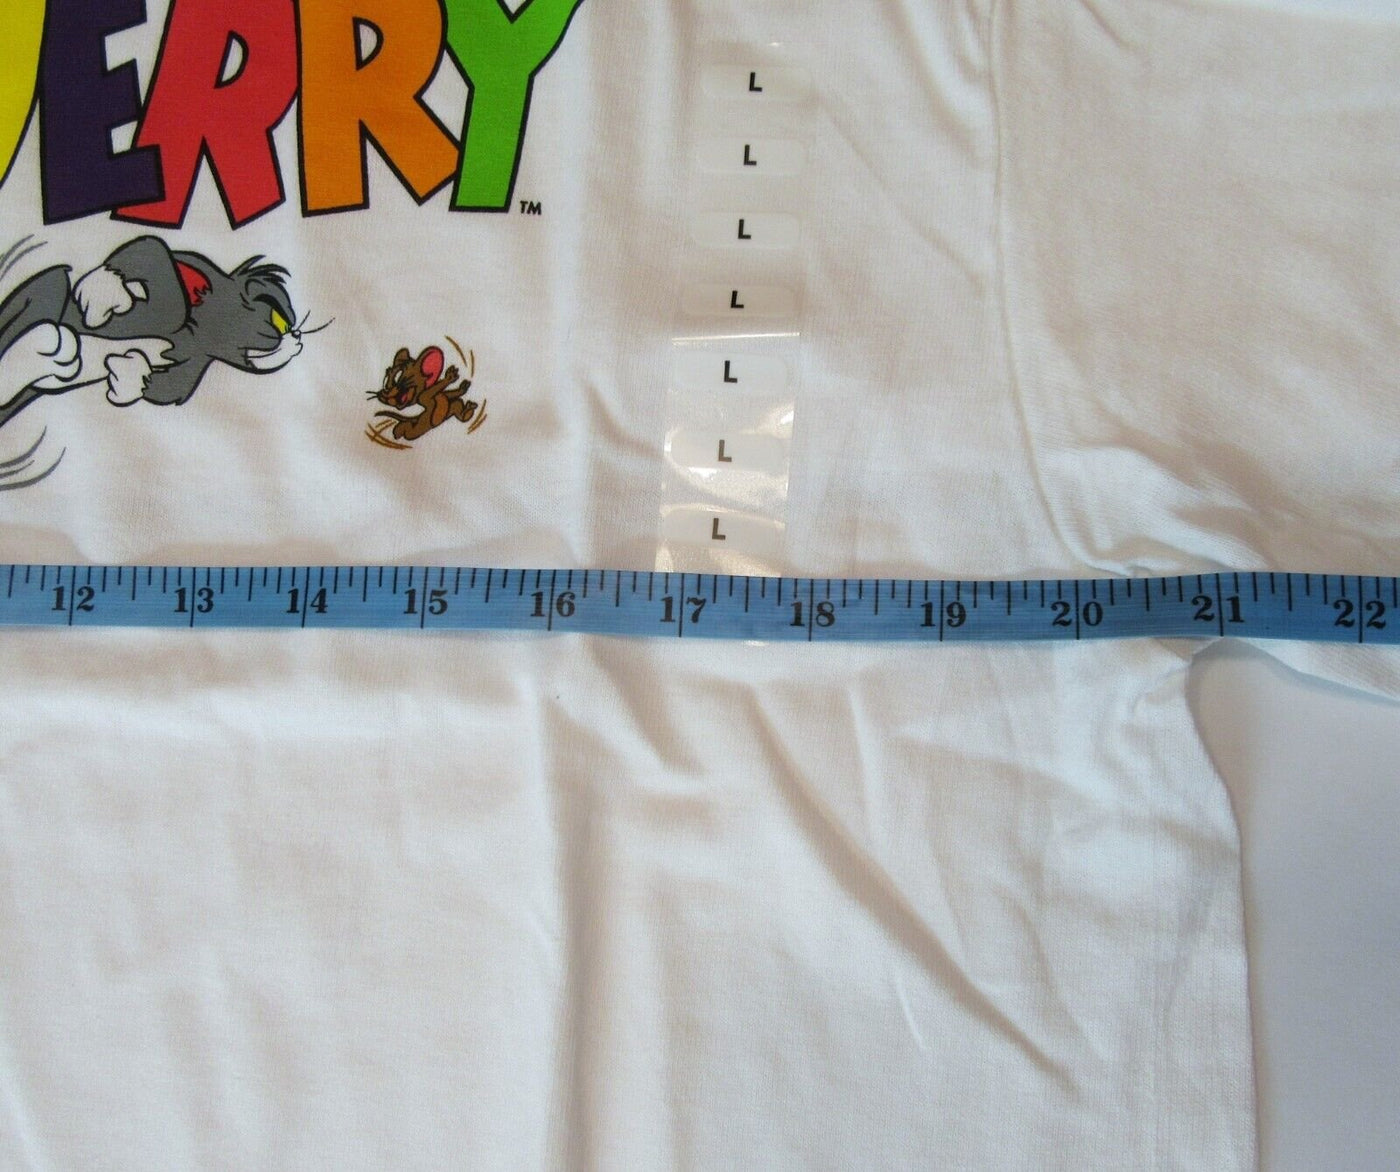 Tom and Jerry White T-Shirt ~ Extra Large cat & mouse Cartoon w/ bull dog Spike